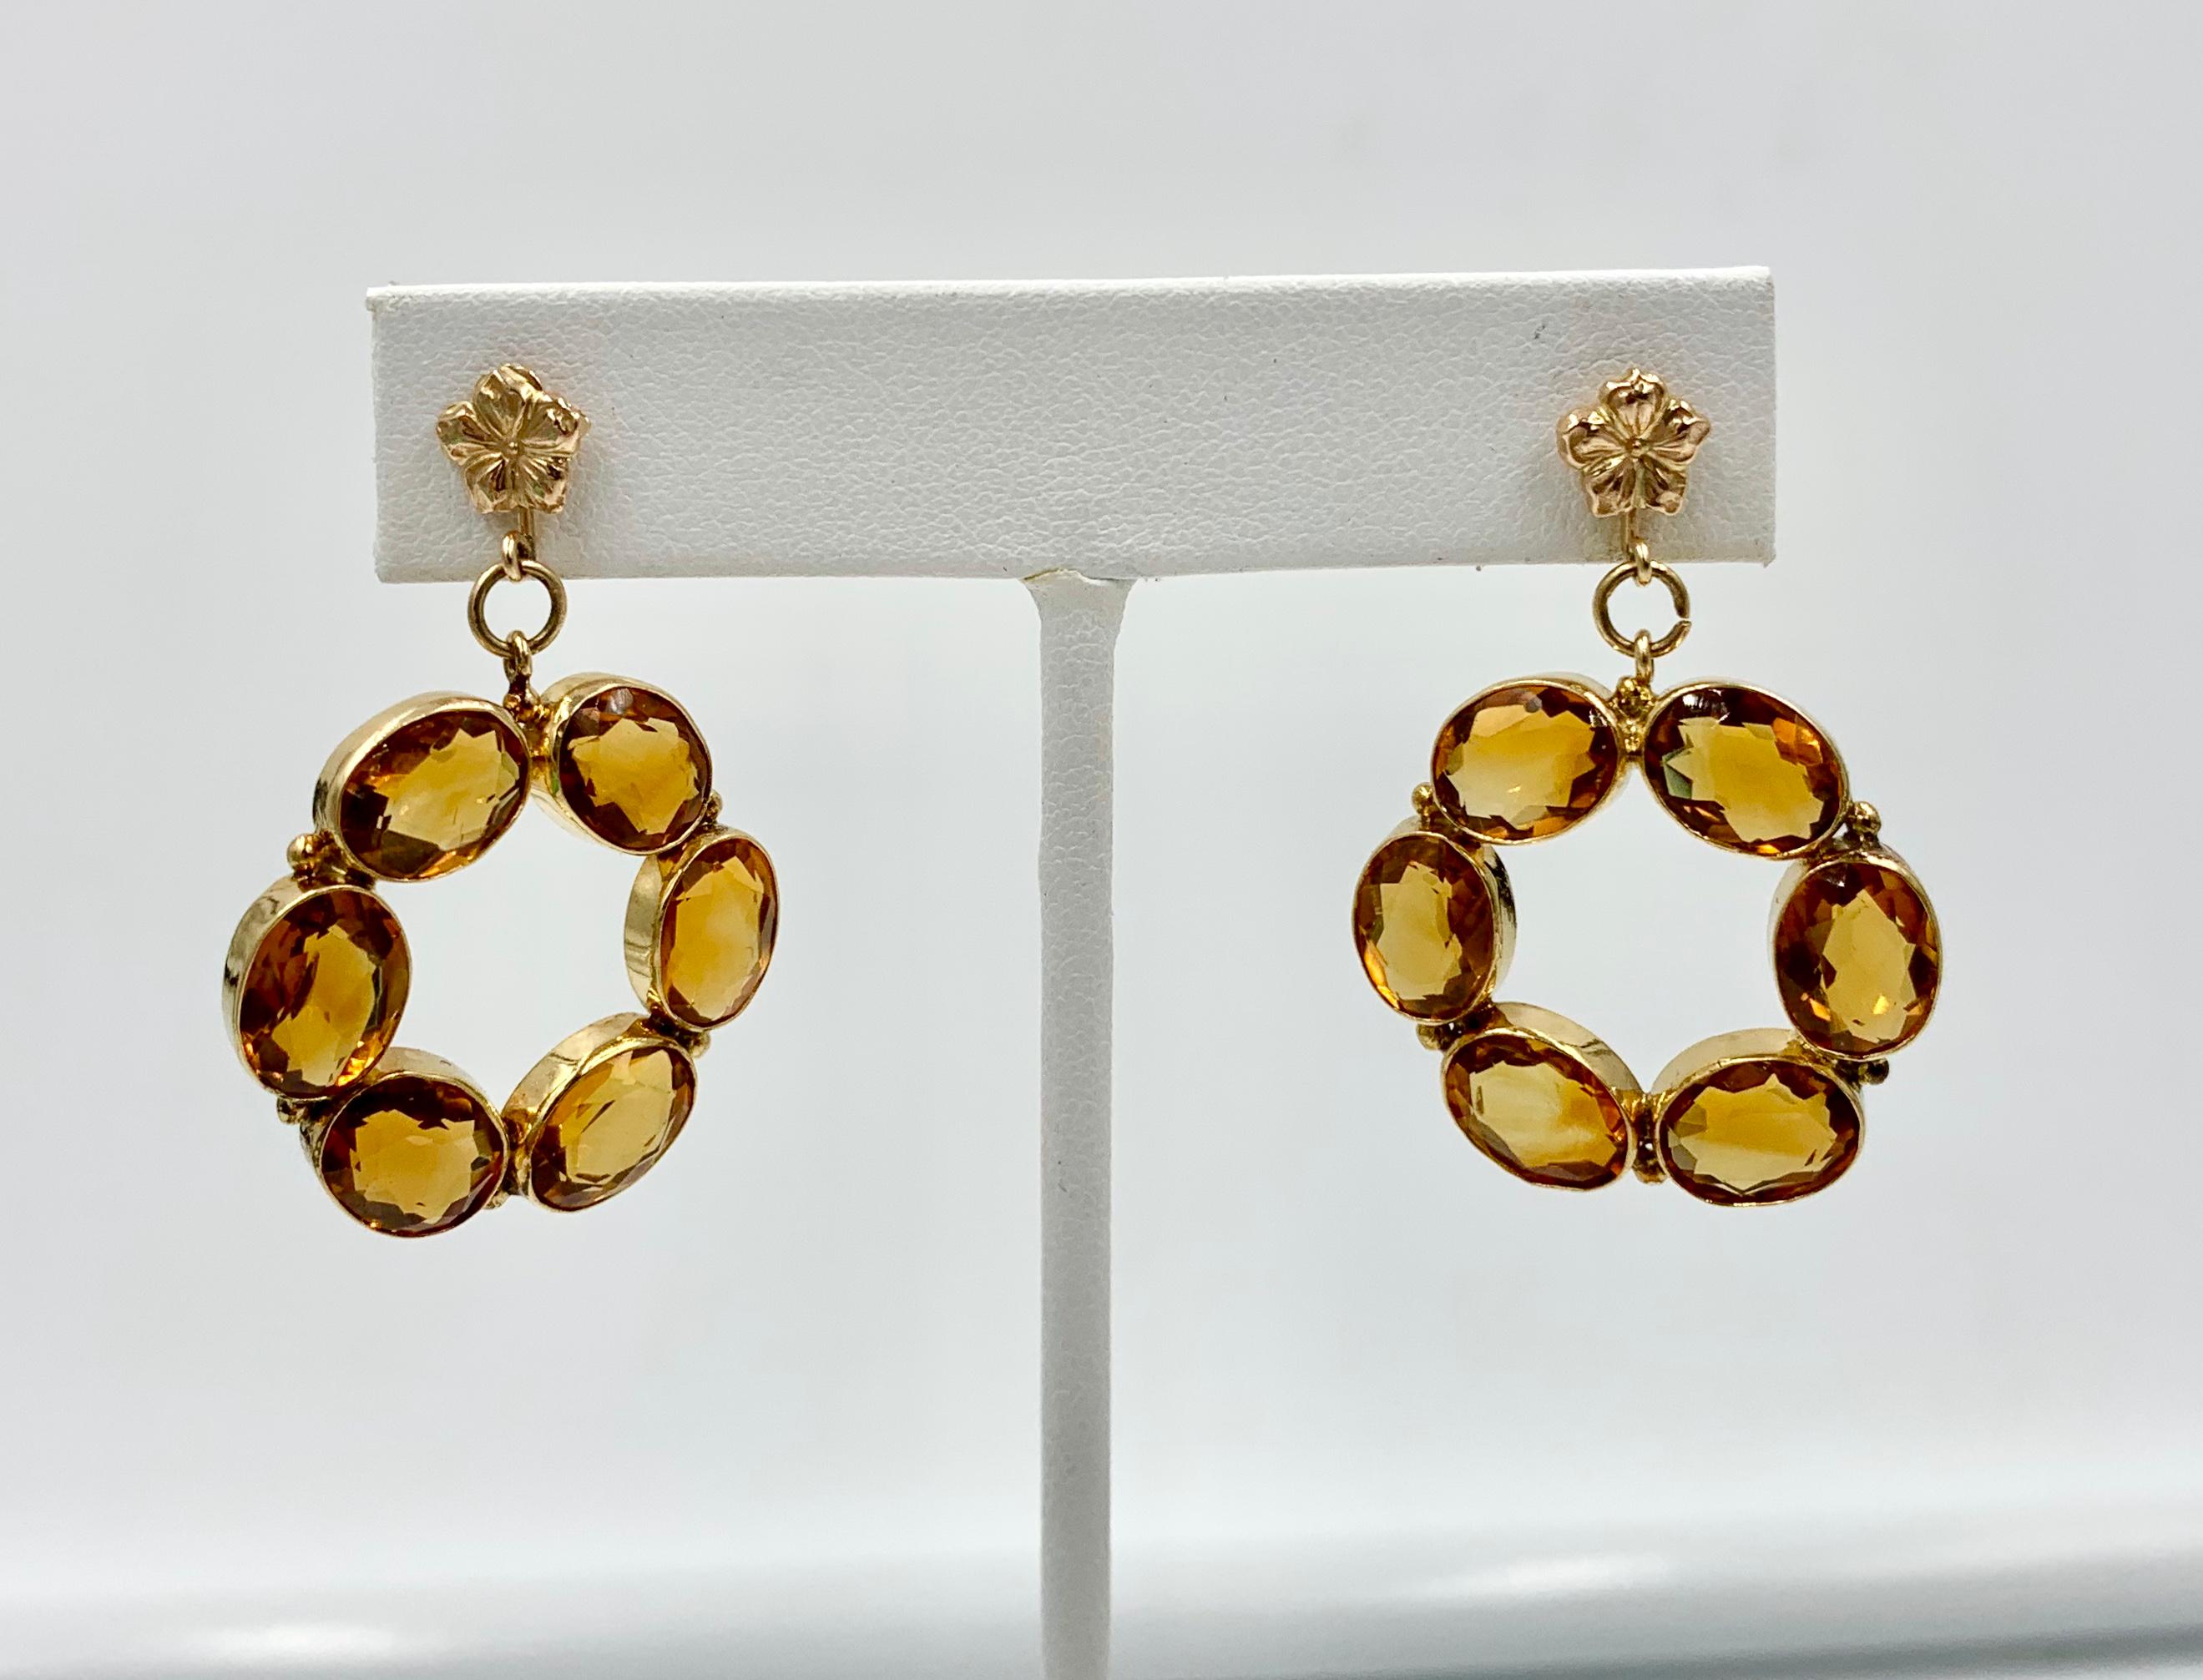 A stunning pair of Retro Citrine Earrings with 12 Oval Faceted Citrine gems of great beauty set in a circle and hanging from a flower medallion.  The gorgeous gems total approximately 12 Carats and are sparkling radiant Citrines.  The wonderful open